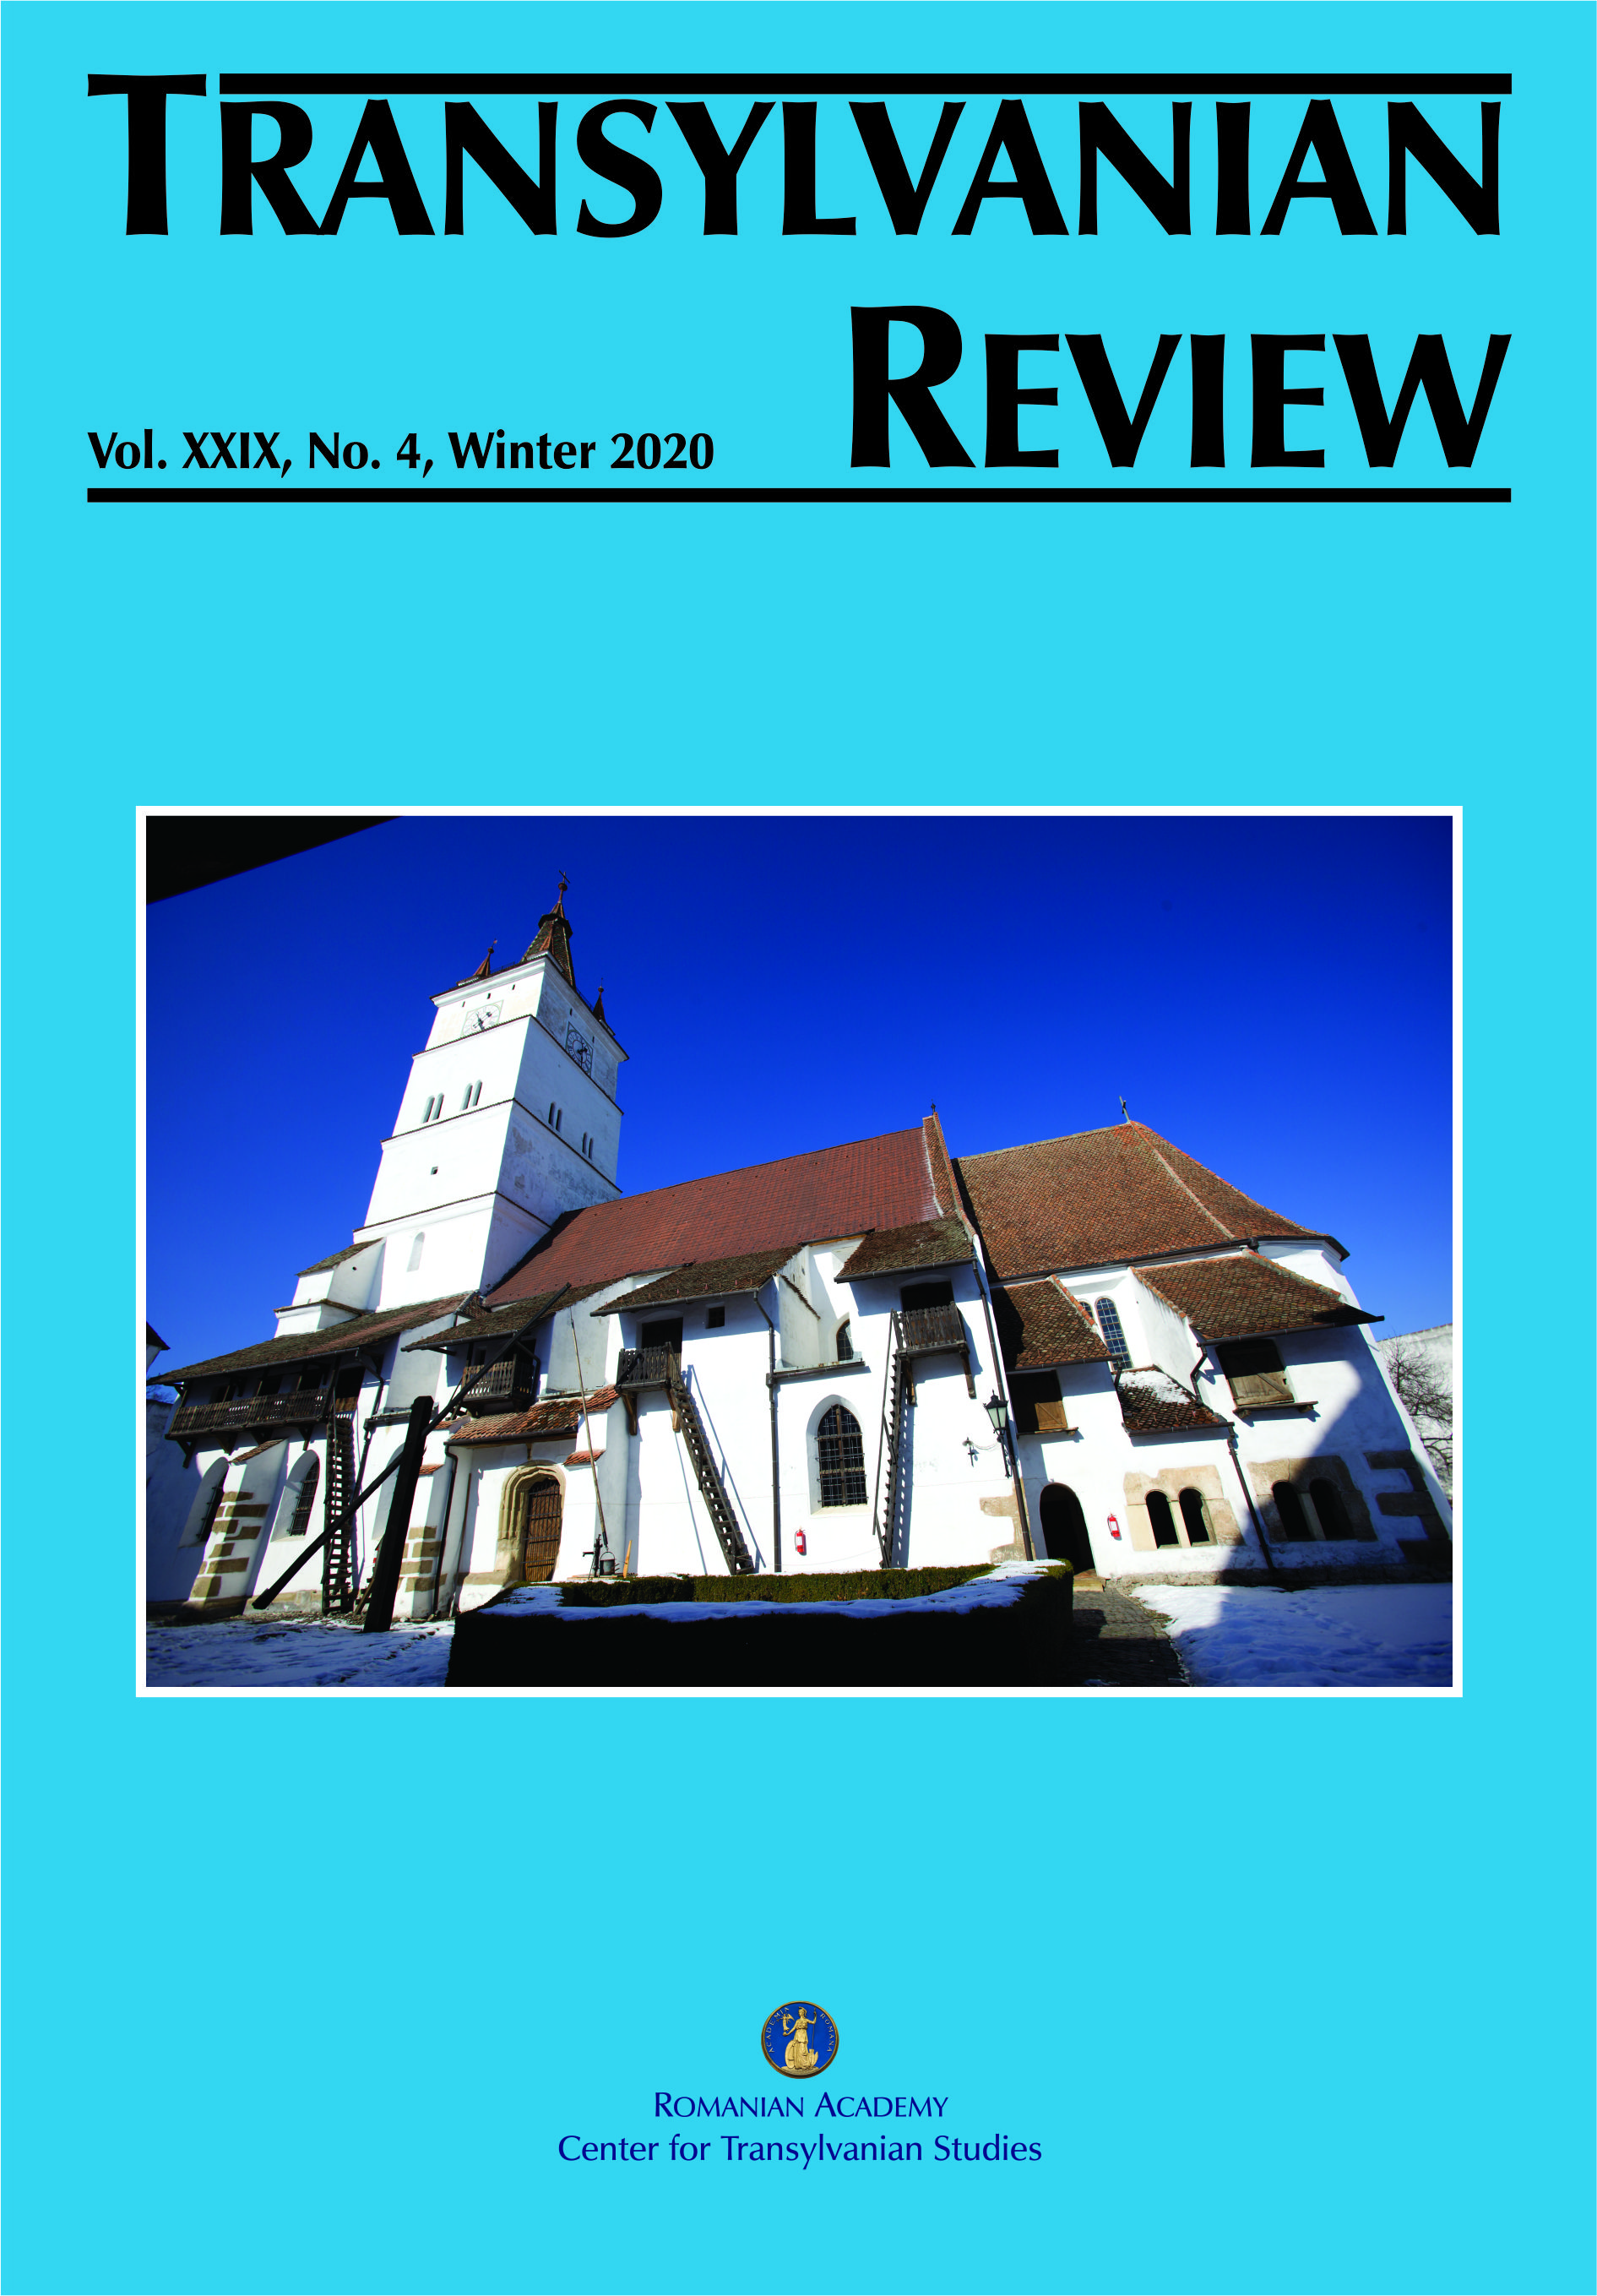 An Assessment of the Saxon Cultural Heritage by Other Cohabiting Ethnic Groups in Southern Transylvania